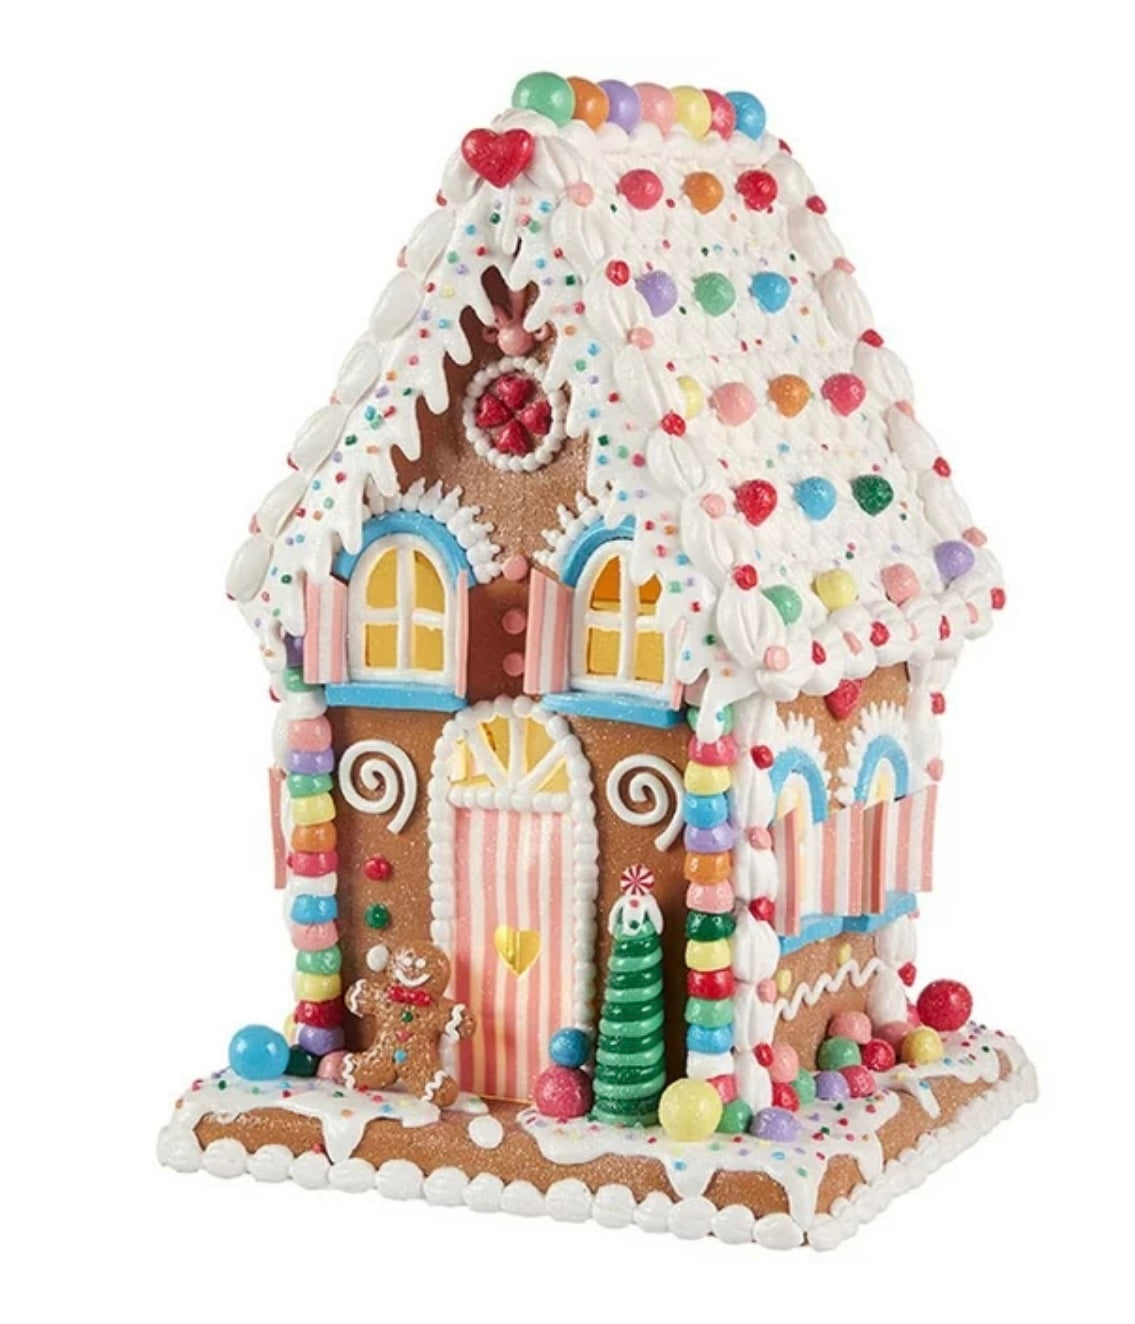 14” Lighted Gingerbread House